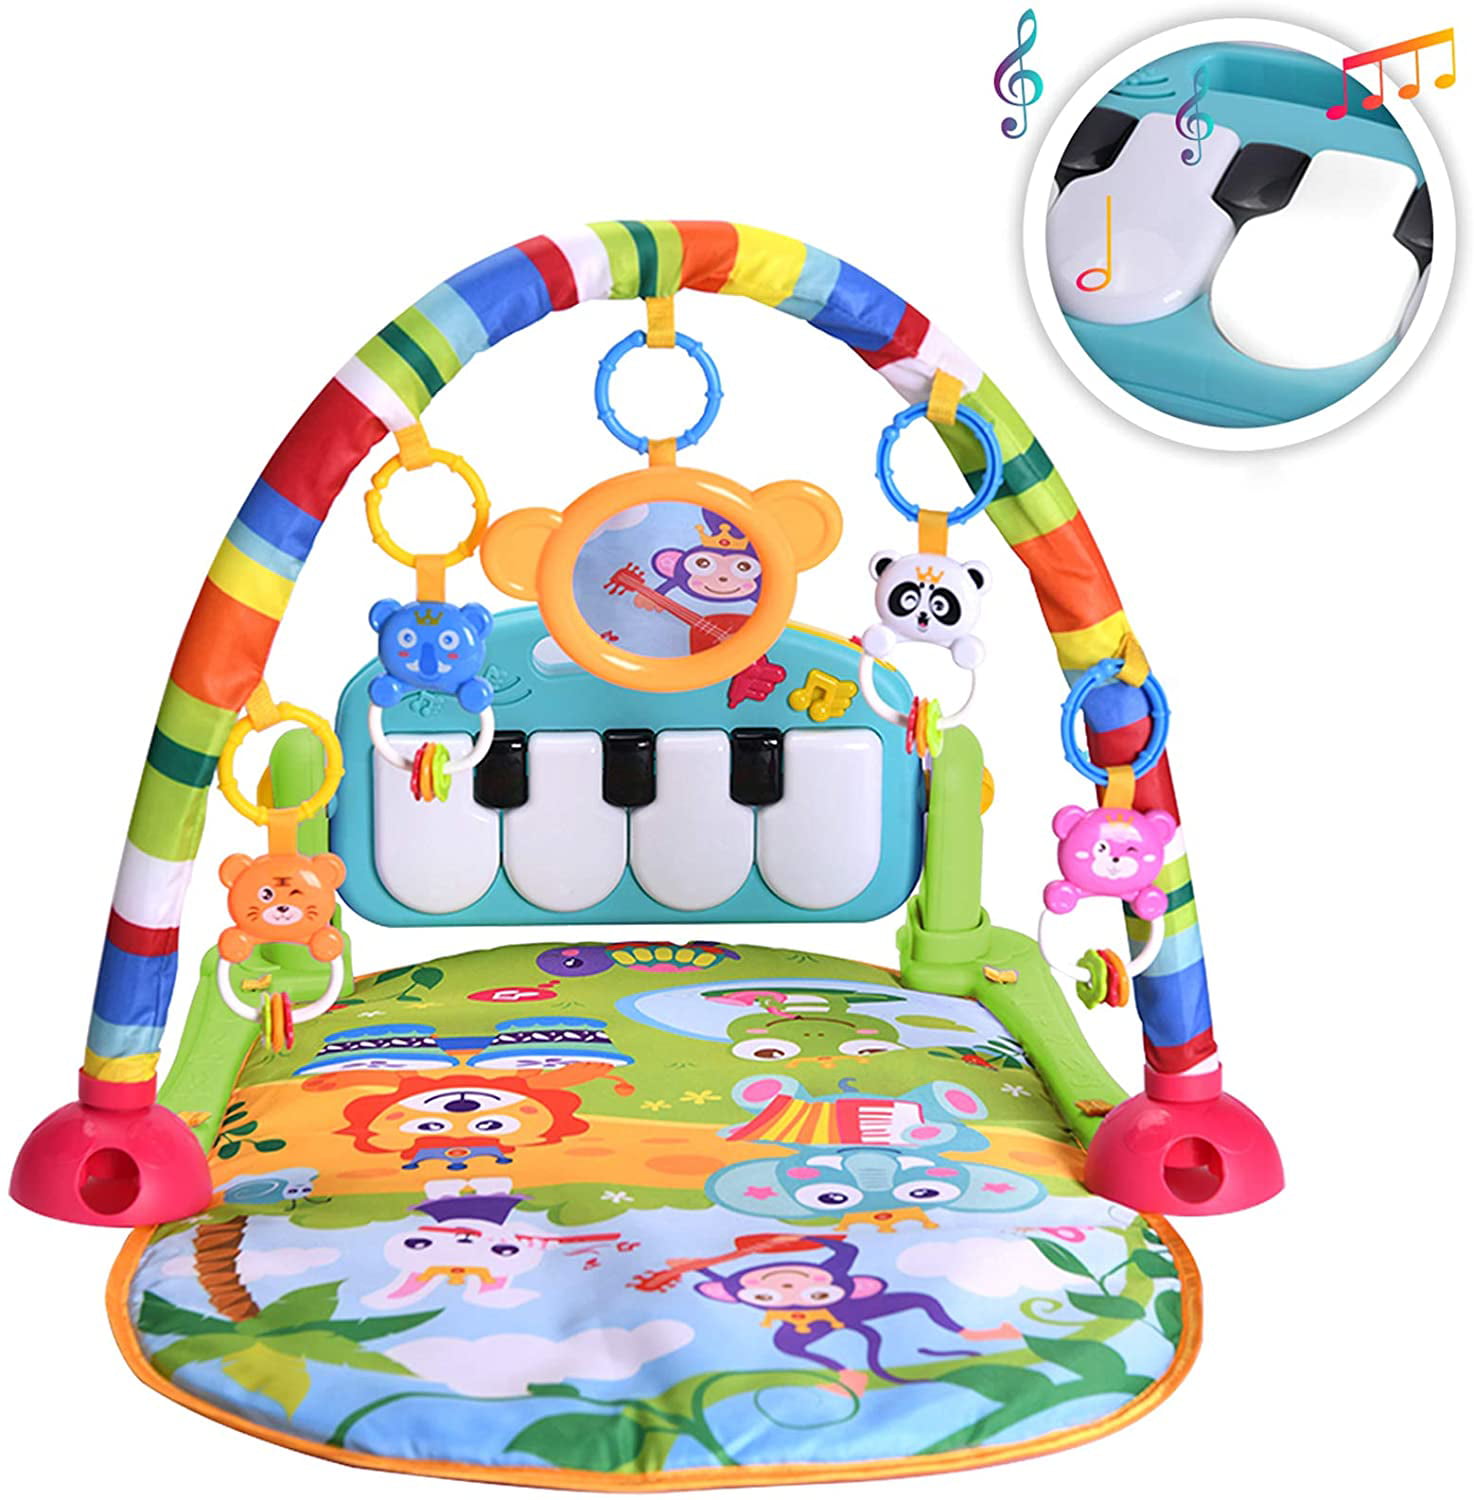 Ideal Baby Shower Gifts WYSWYG Baby Gym Play Mats for Infants Baby Play Gym Activity Mat Kick and Play Piano Gym Activity Center for Baby with Music and Lights